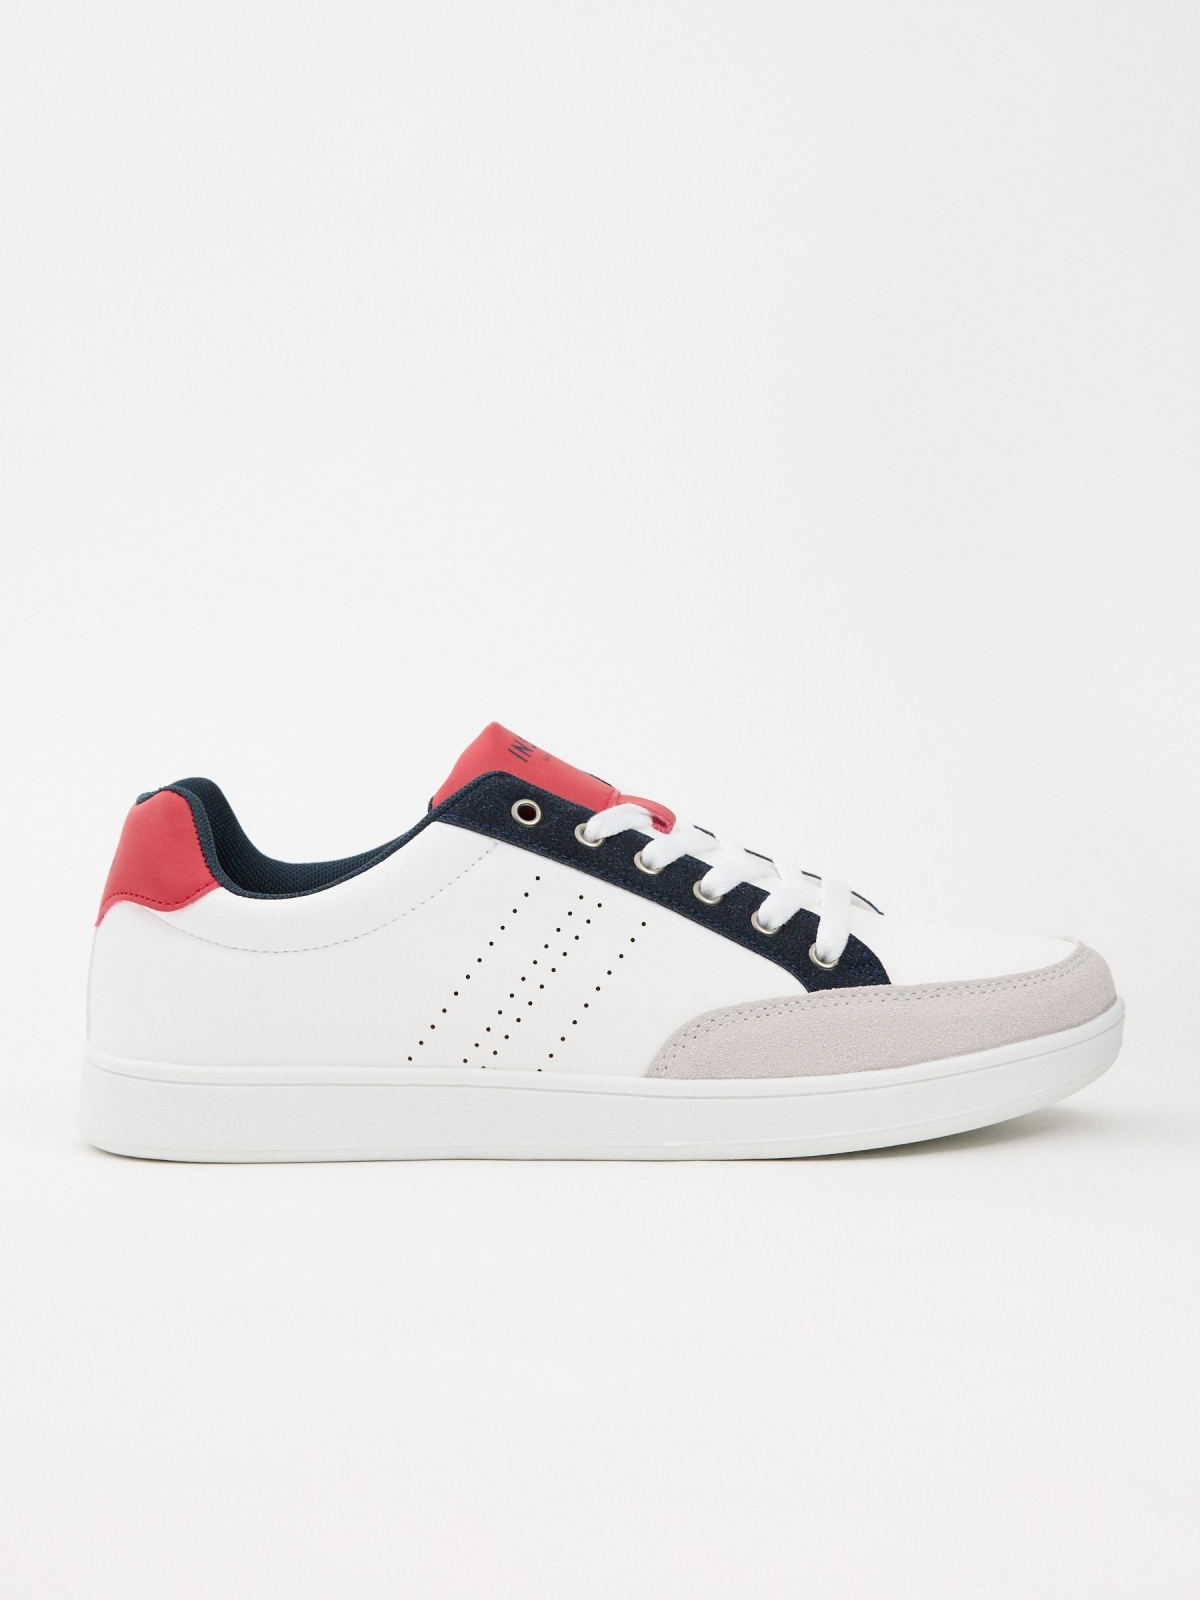 Combined leather effect casual sneakers white